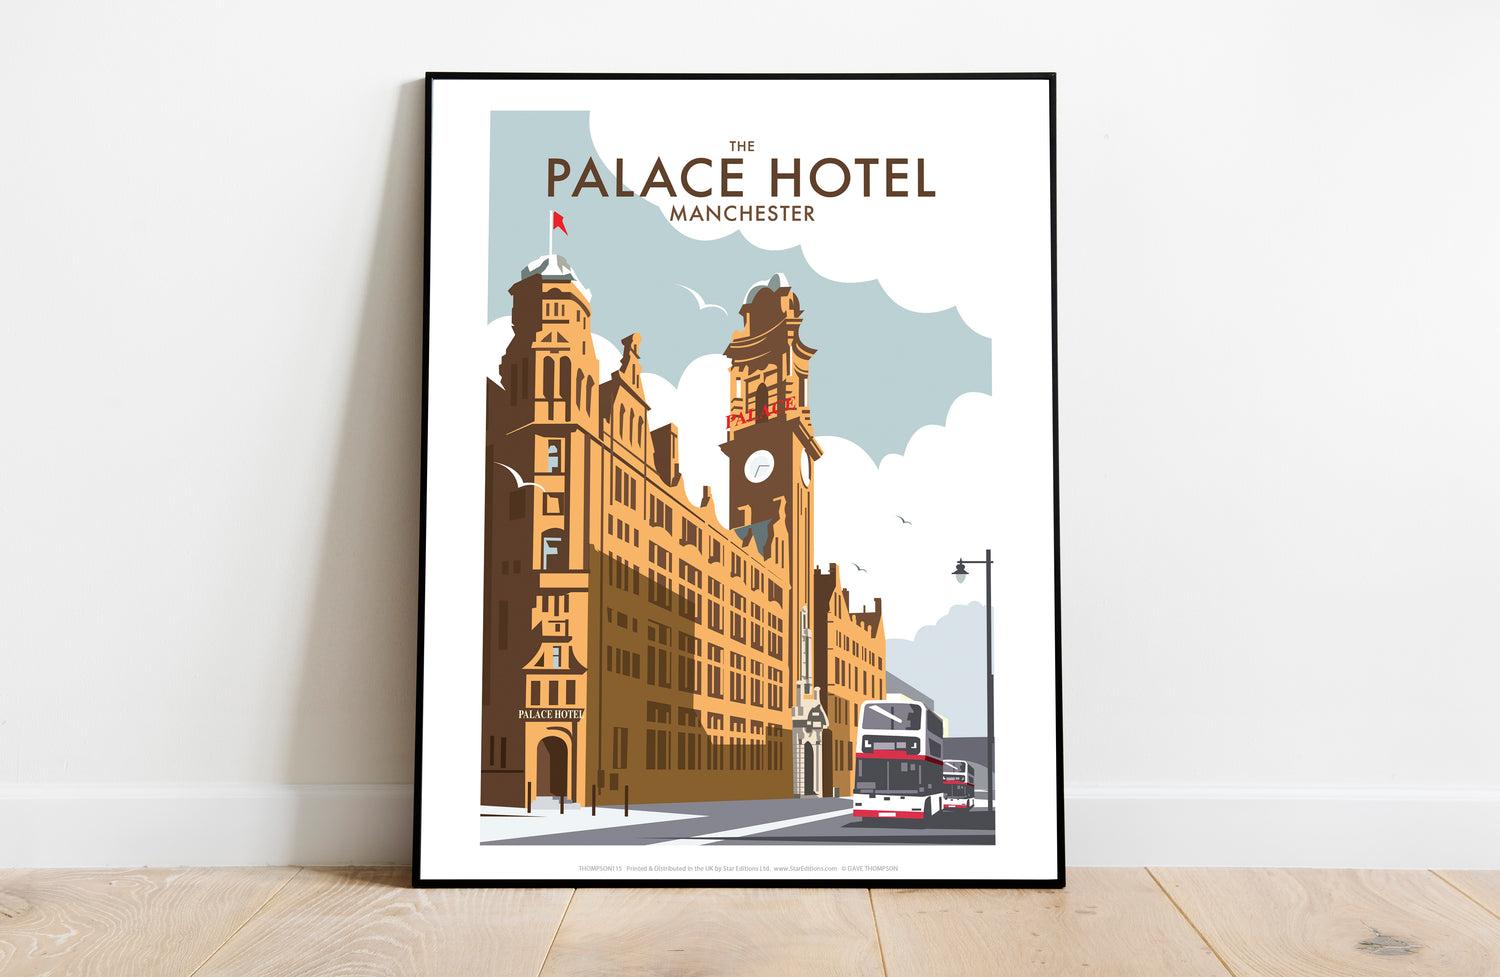 The Palace Hotel, Manchester - Art Print